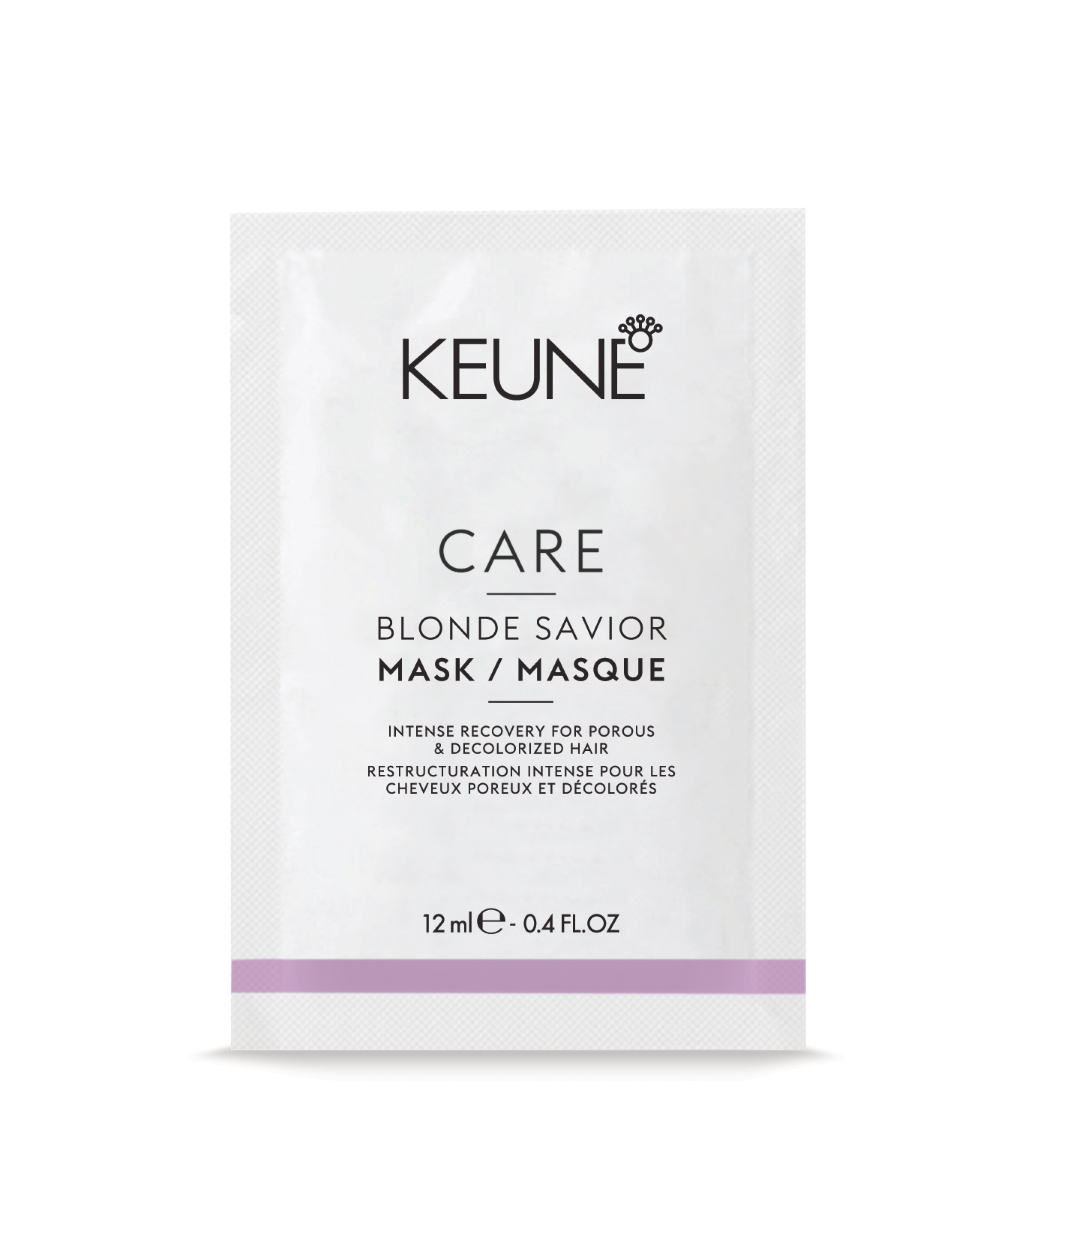 Say goodbye to hair damage with the BLONDE SAVIOR MASK. This intensive hair mask, developed with glycolic acid and creatine, is perfect for damaged, bleached hair. Available on keune.ch.